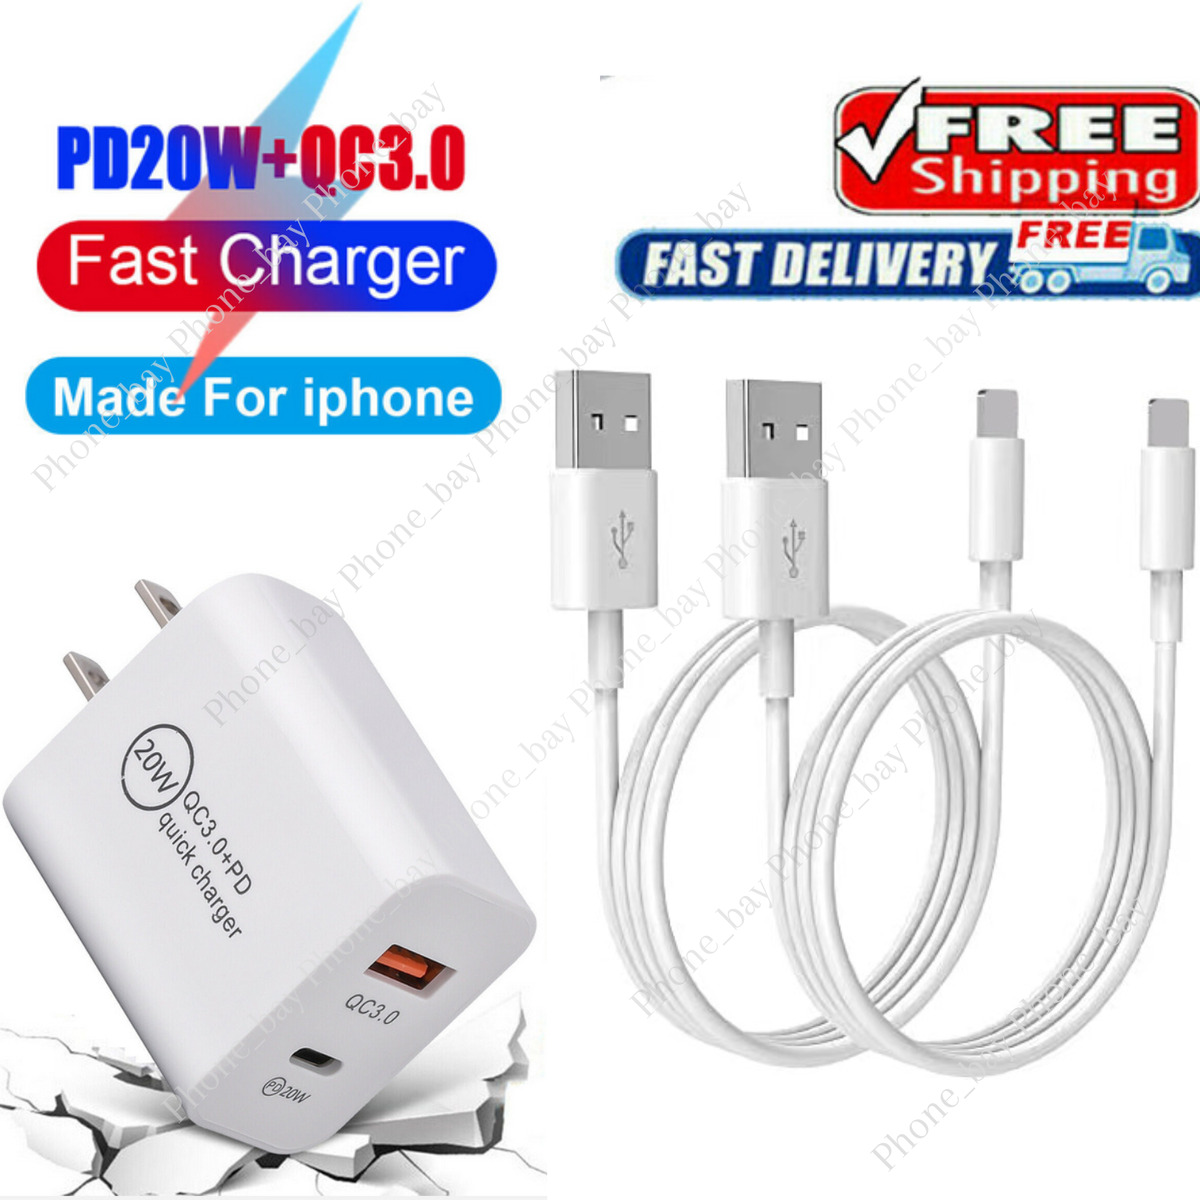 PD 20W USB Fast Wall Charger Power Adapter For iPhone 13/12/11 8 Pro Max iPads 